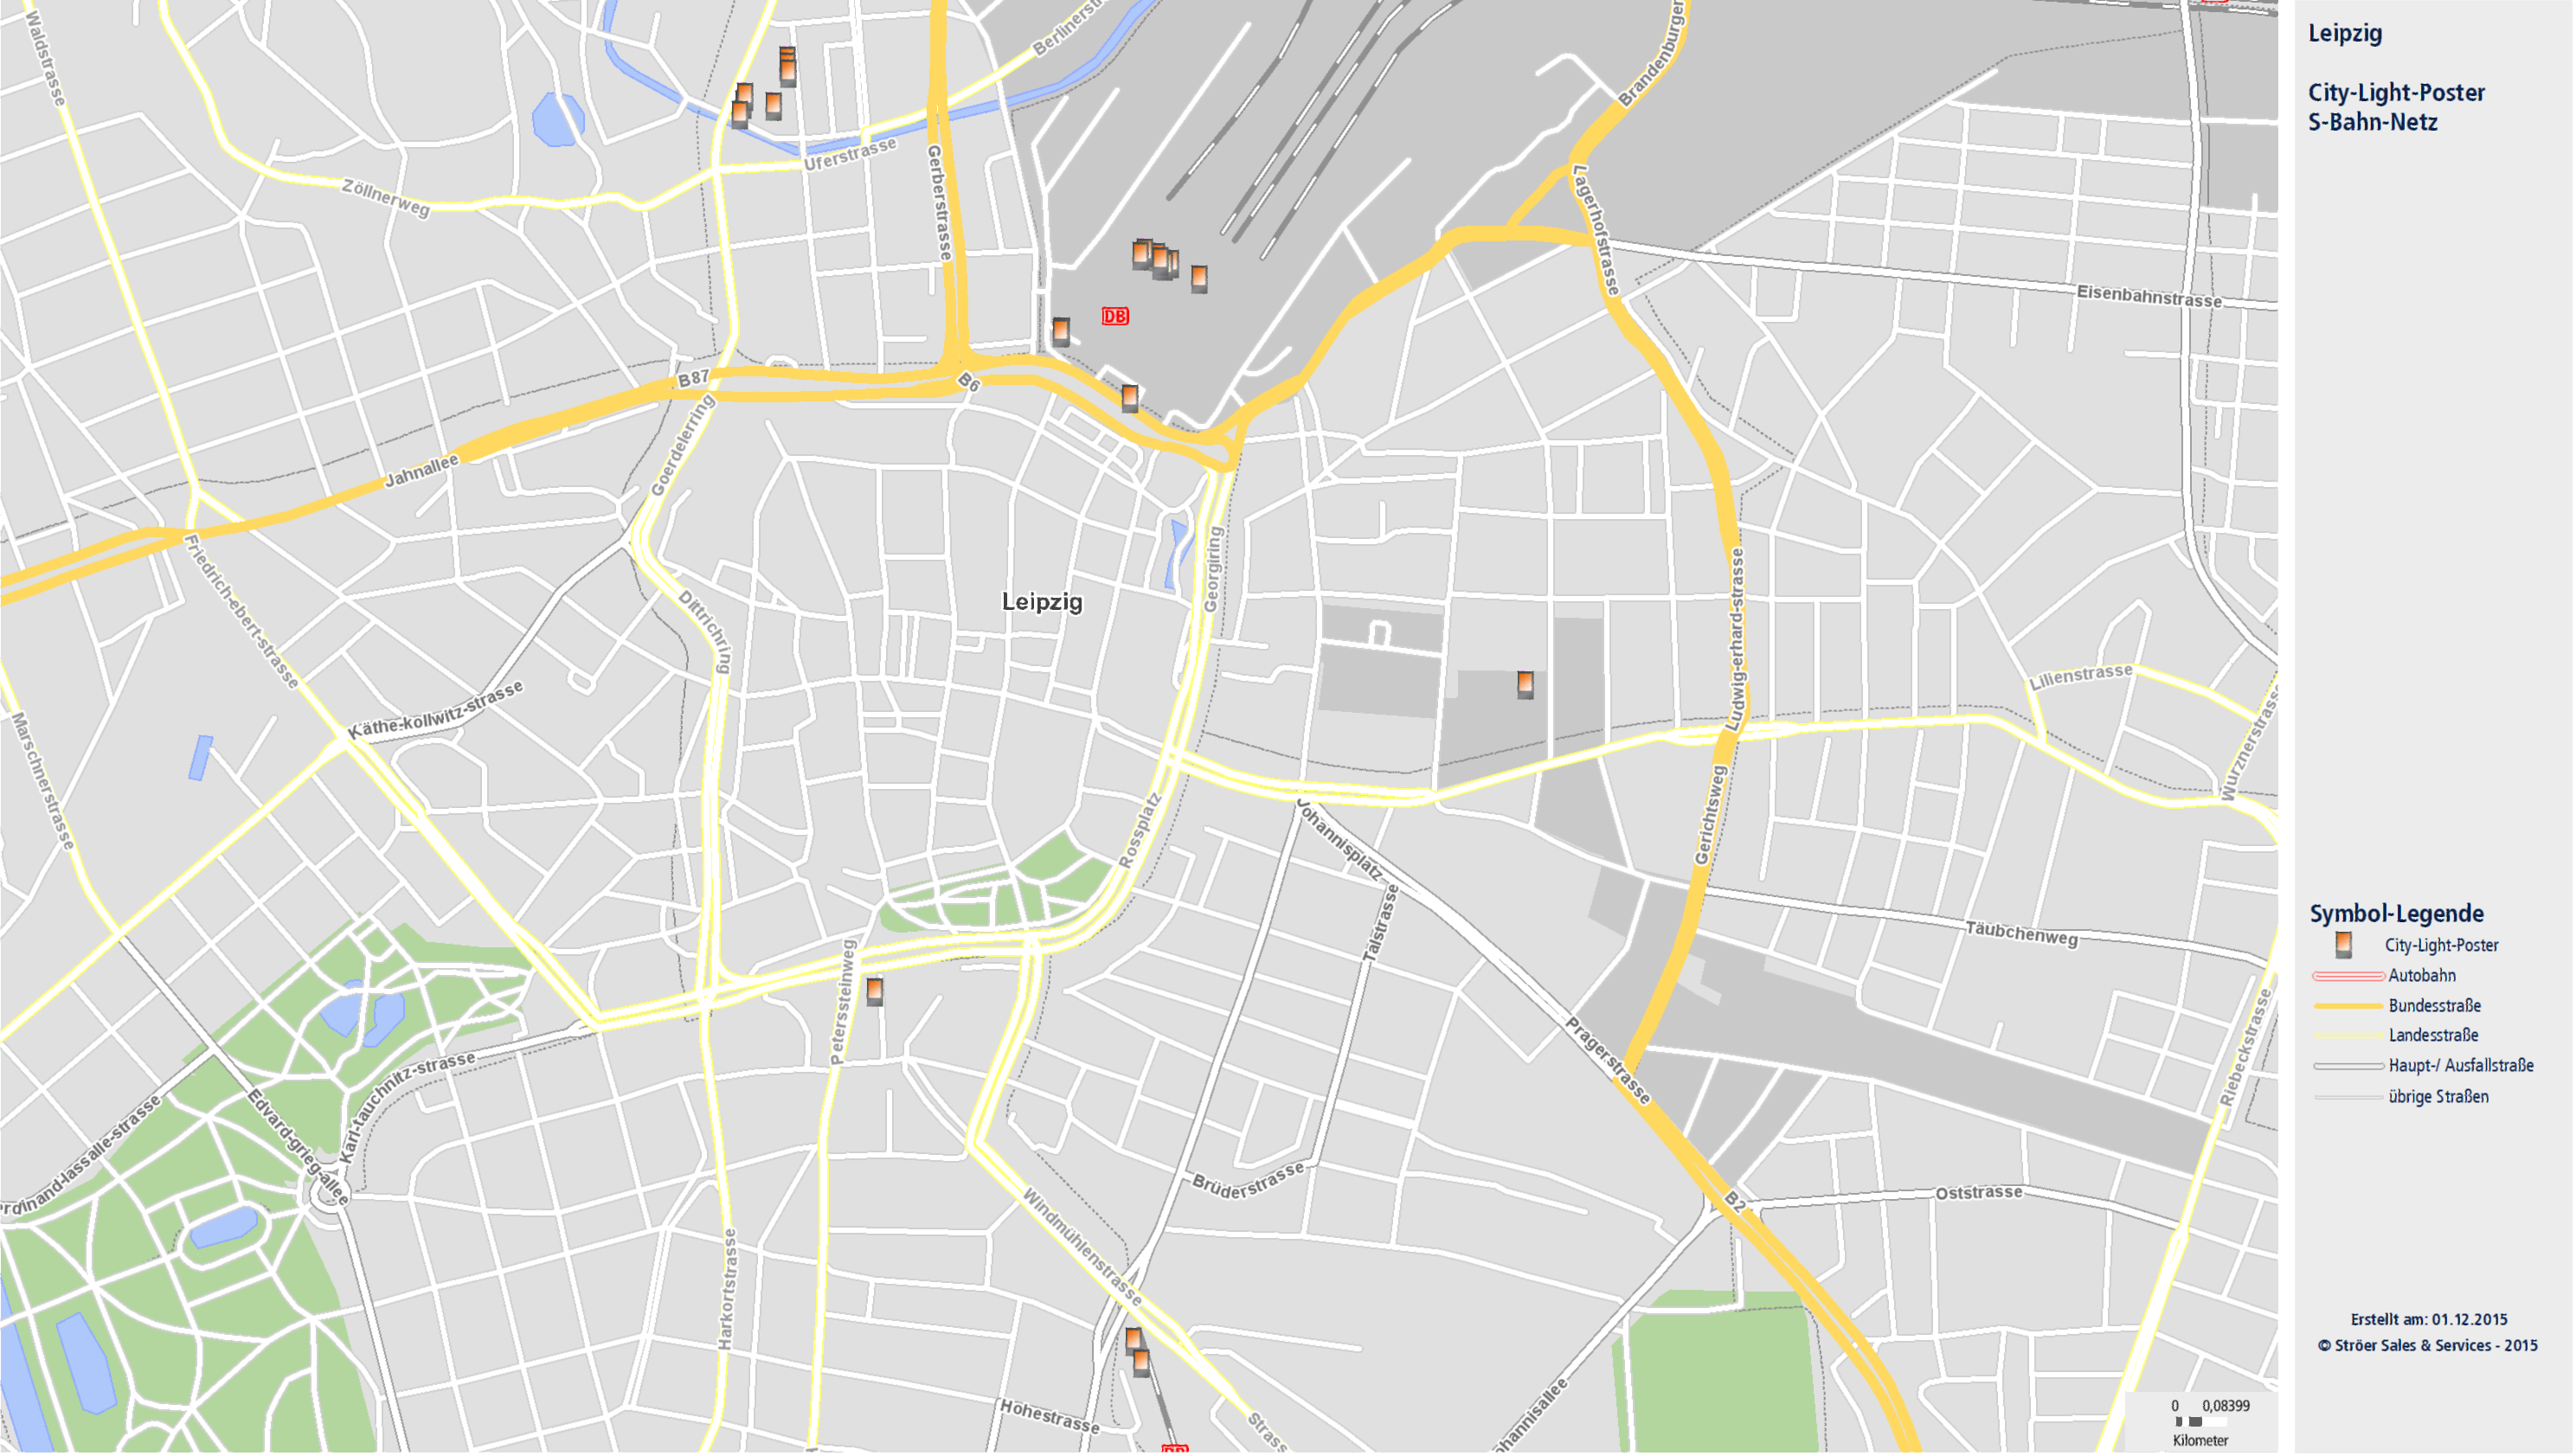 Mapping Leipzig